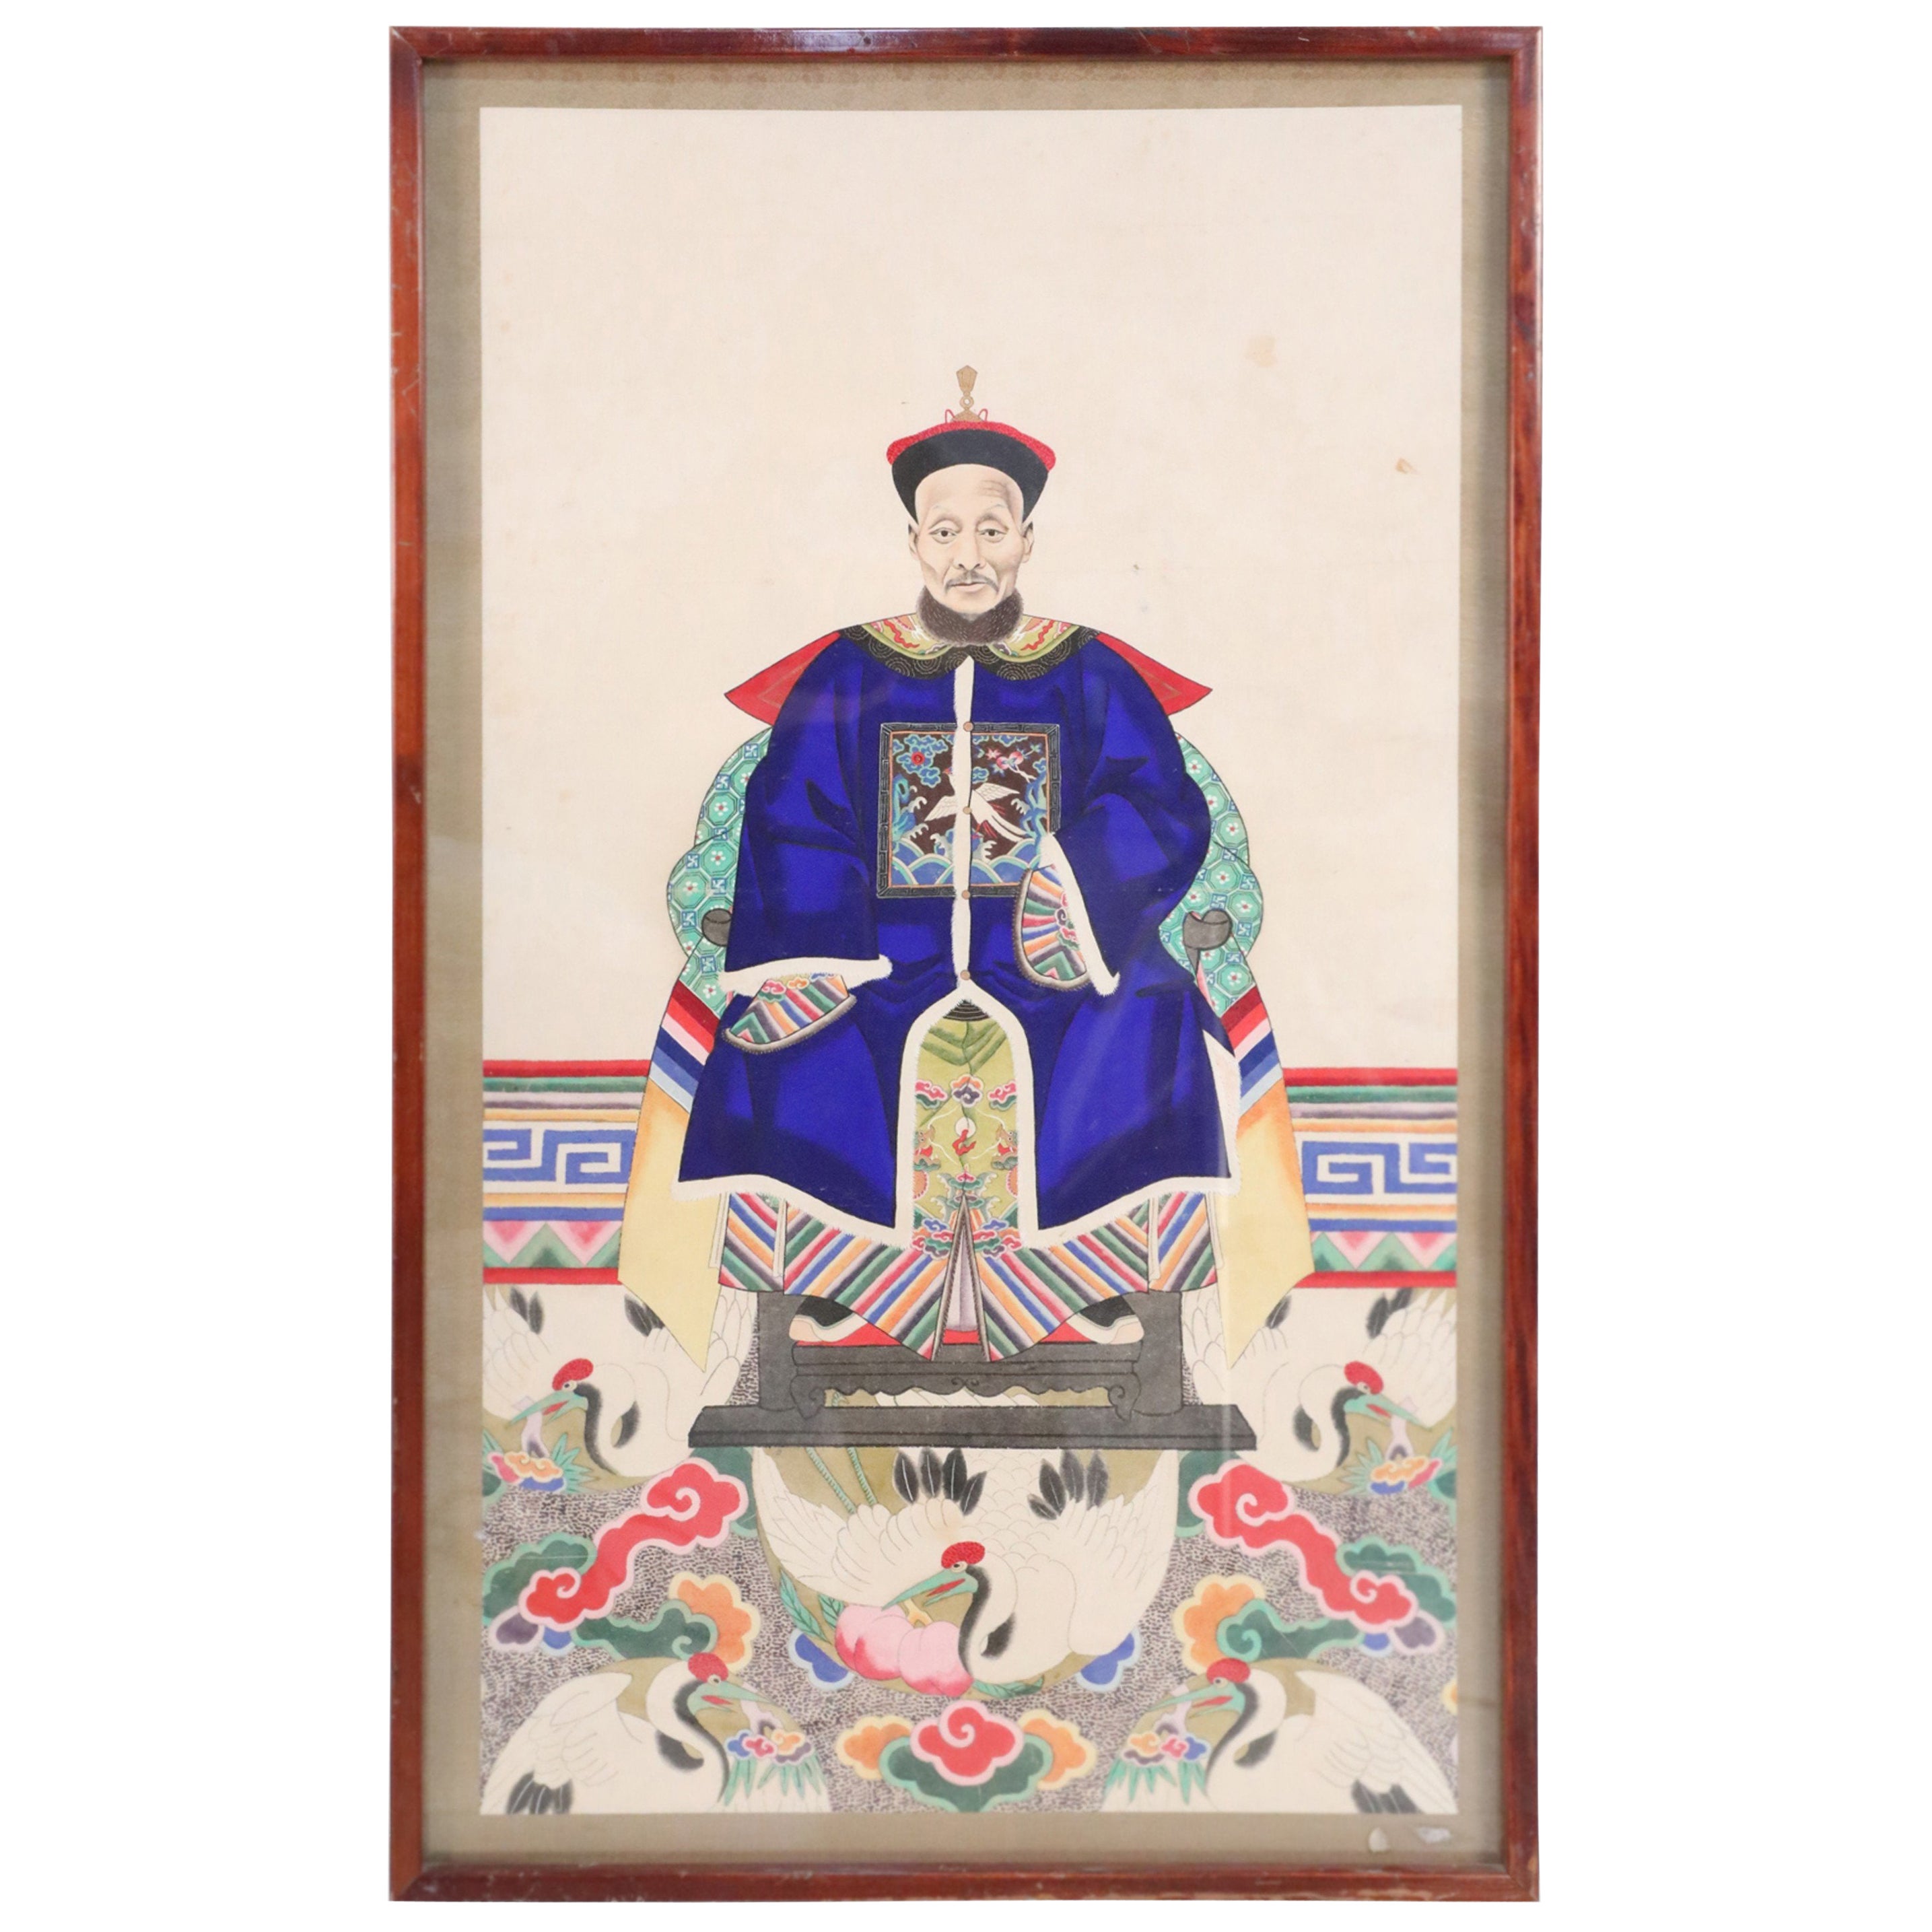 Framed Chinese Ancestor Portrait Print with Royal Blue Robes